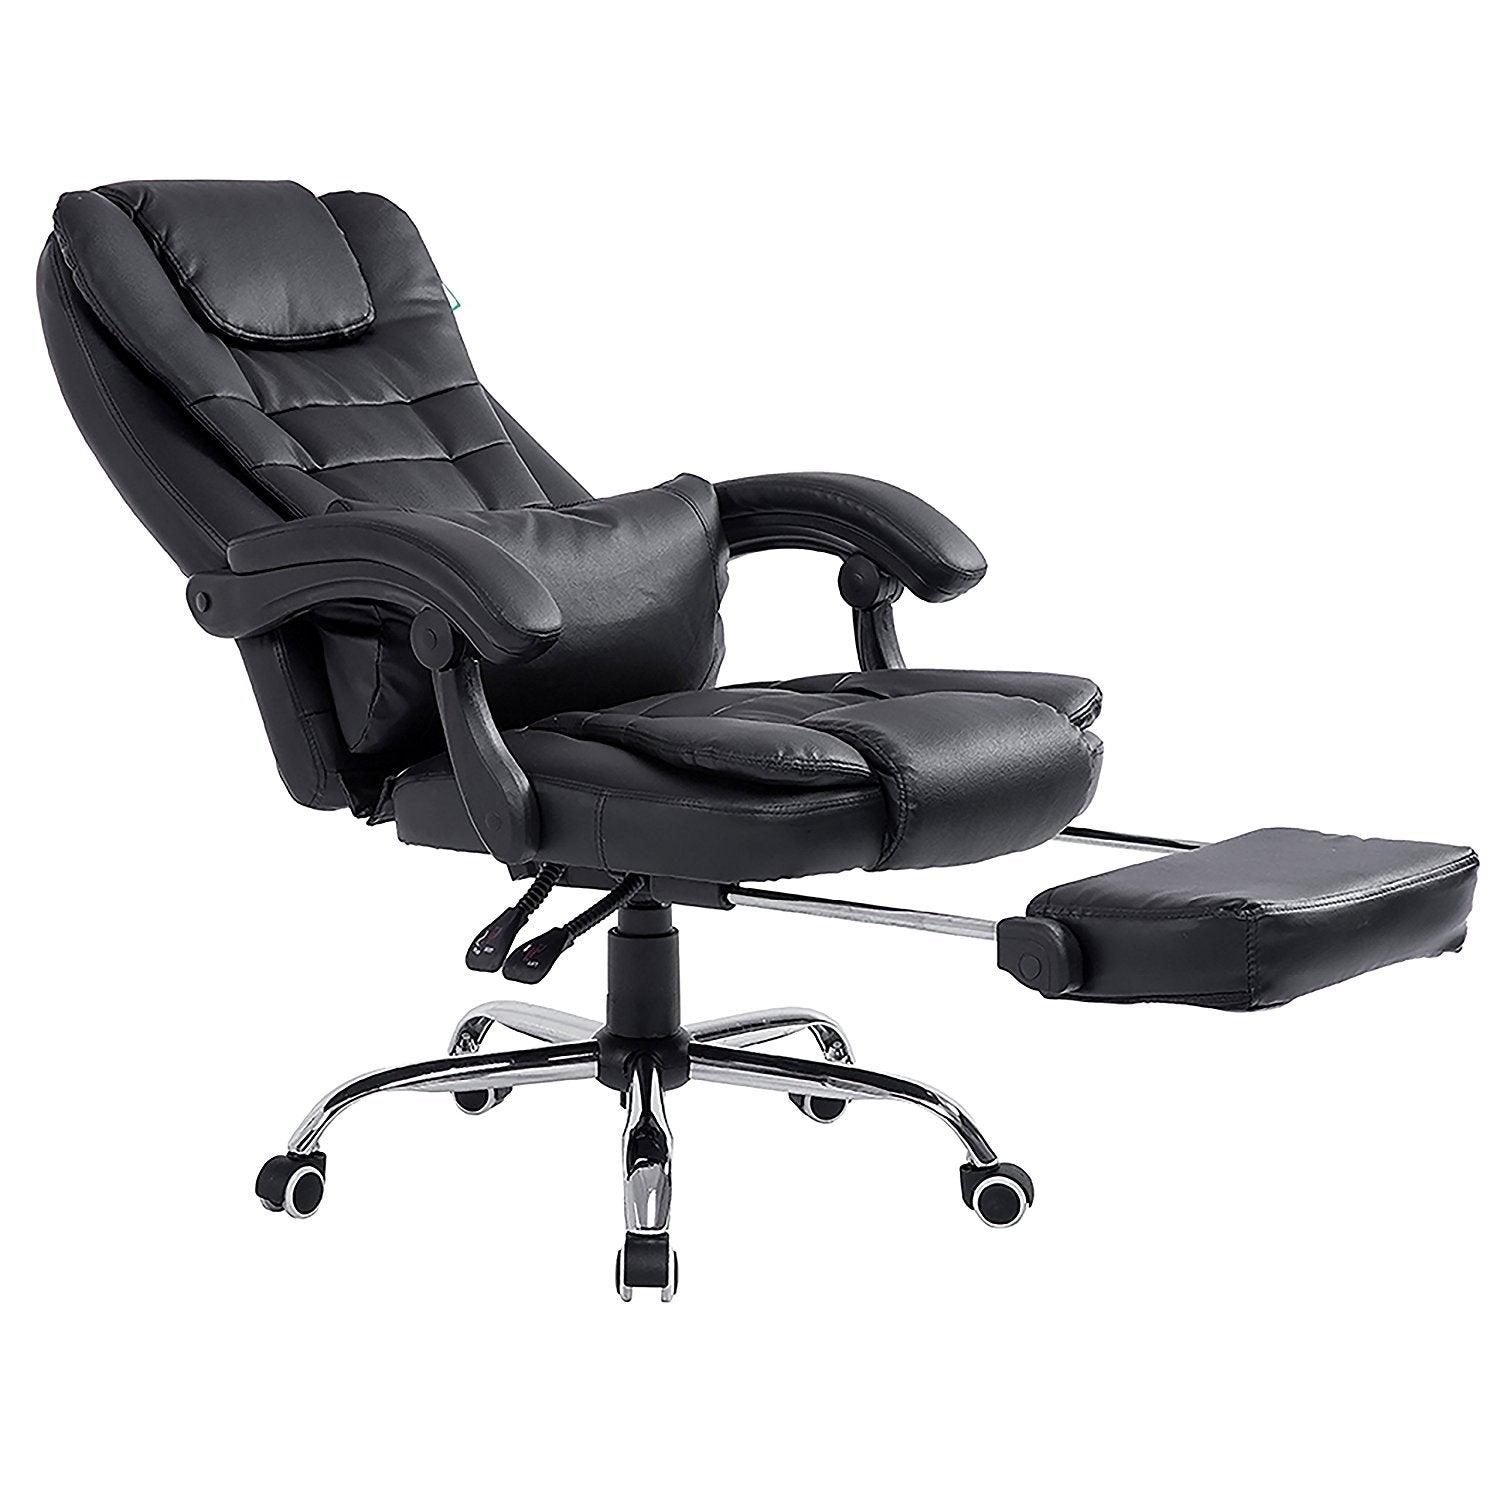 Luxury Extra Padded High Back Recline Faux Leather Relaxing Executive Chair With Footrest, MR34 Black